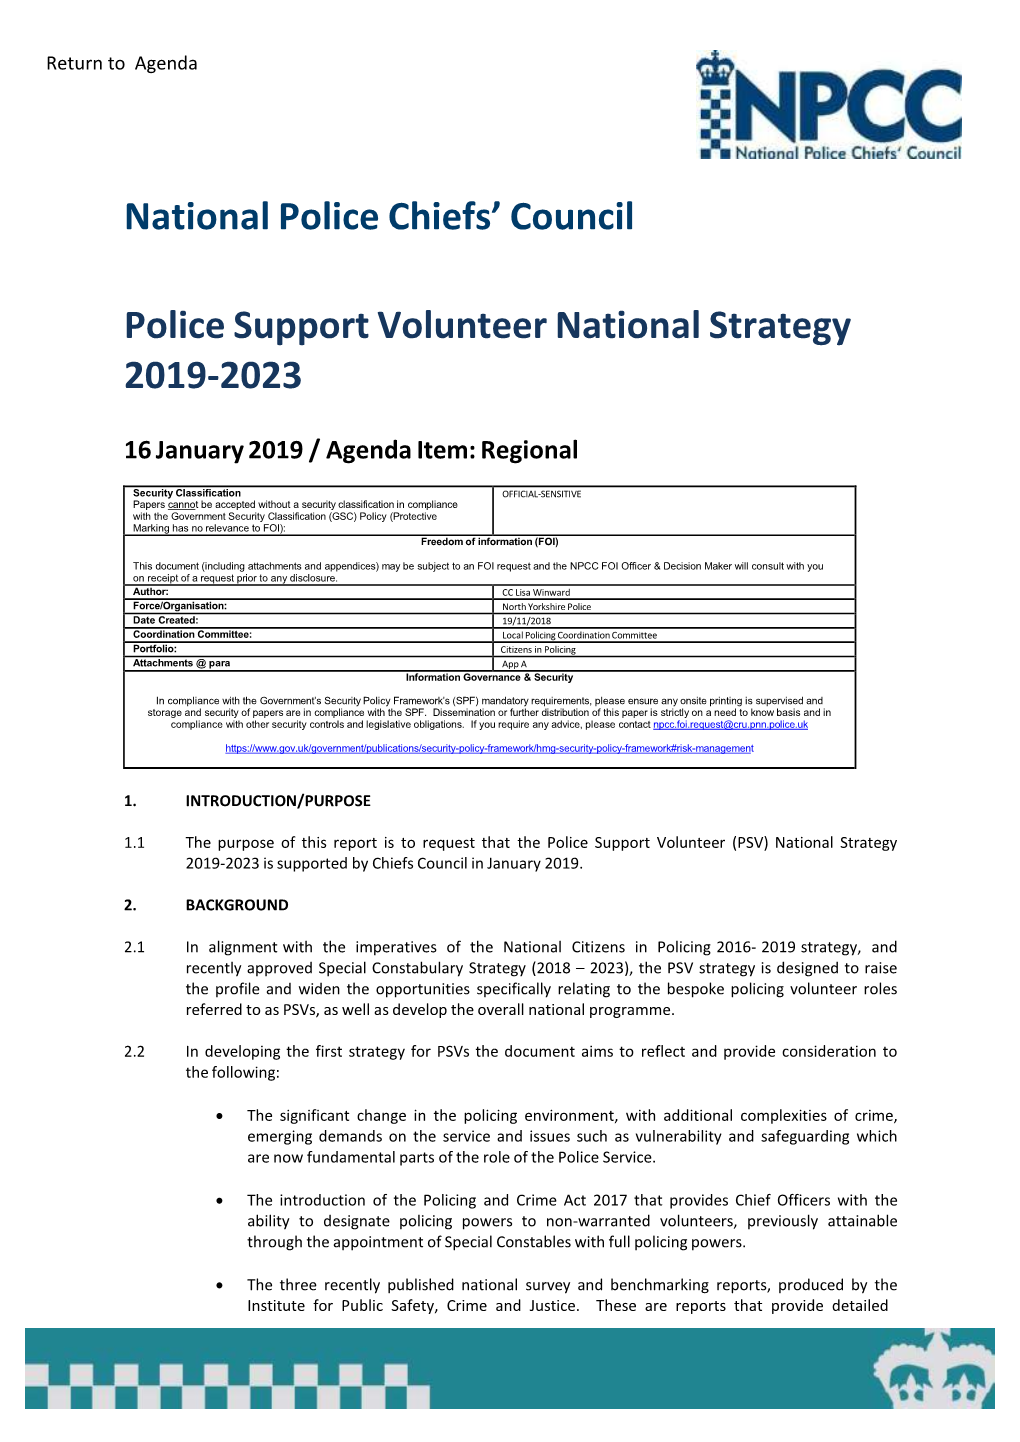 National Police Chiefs' Council Police Support Volunteer National Strategy 2019-2023